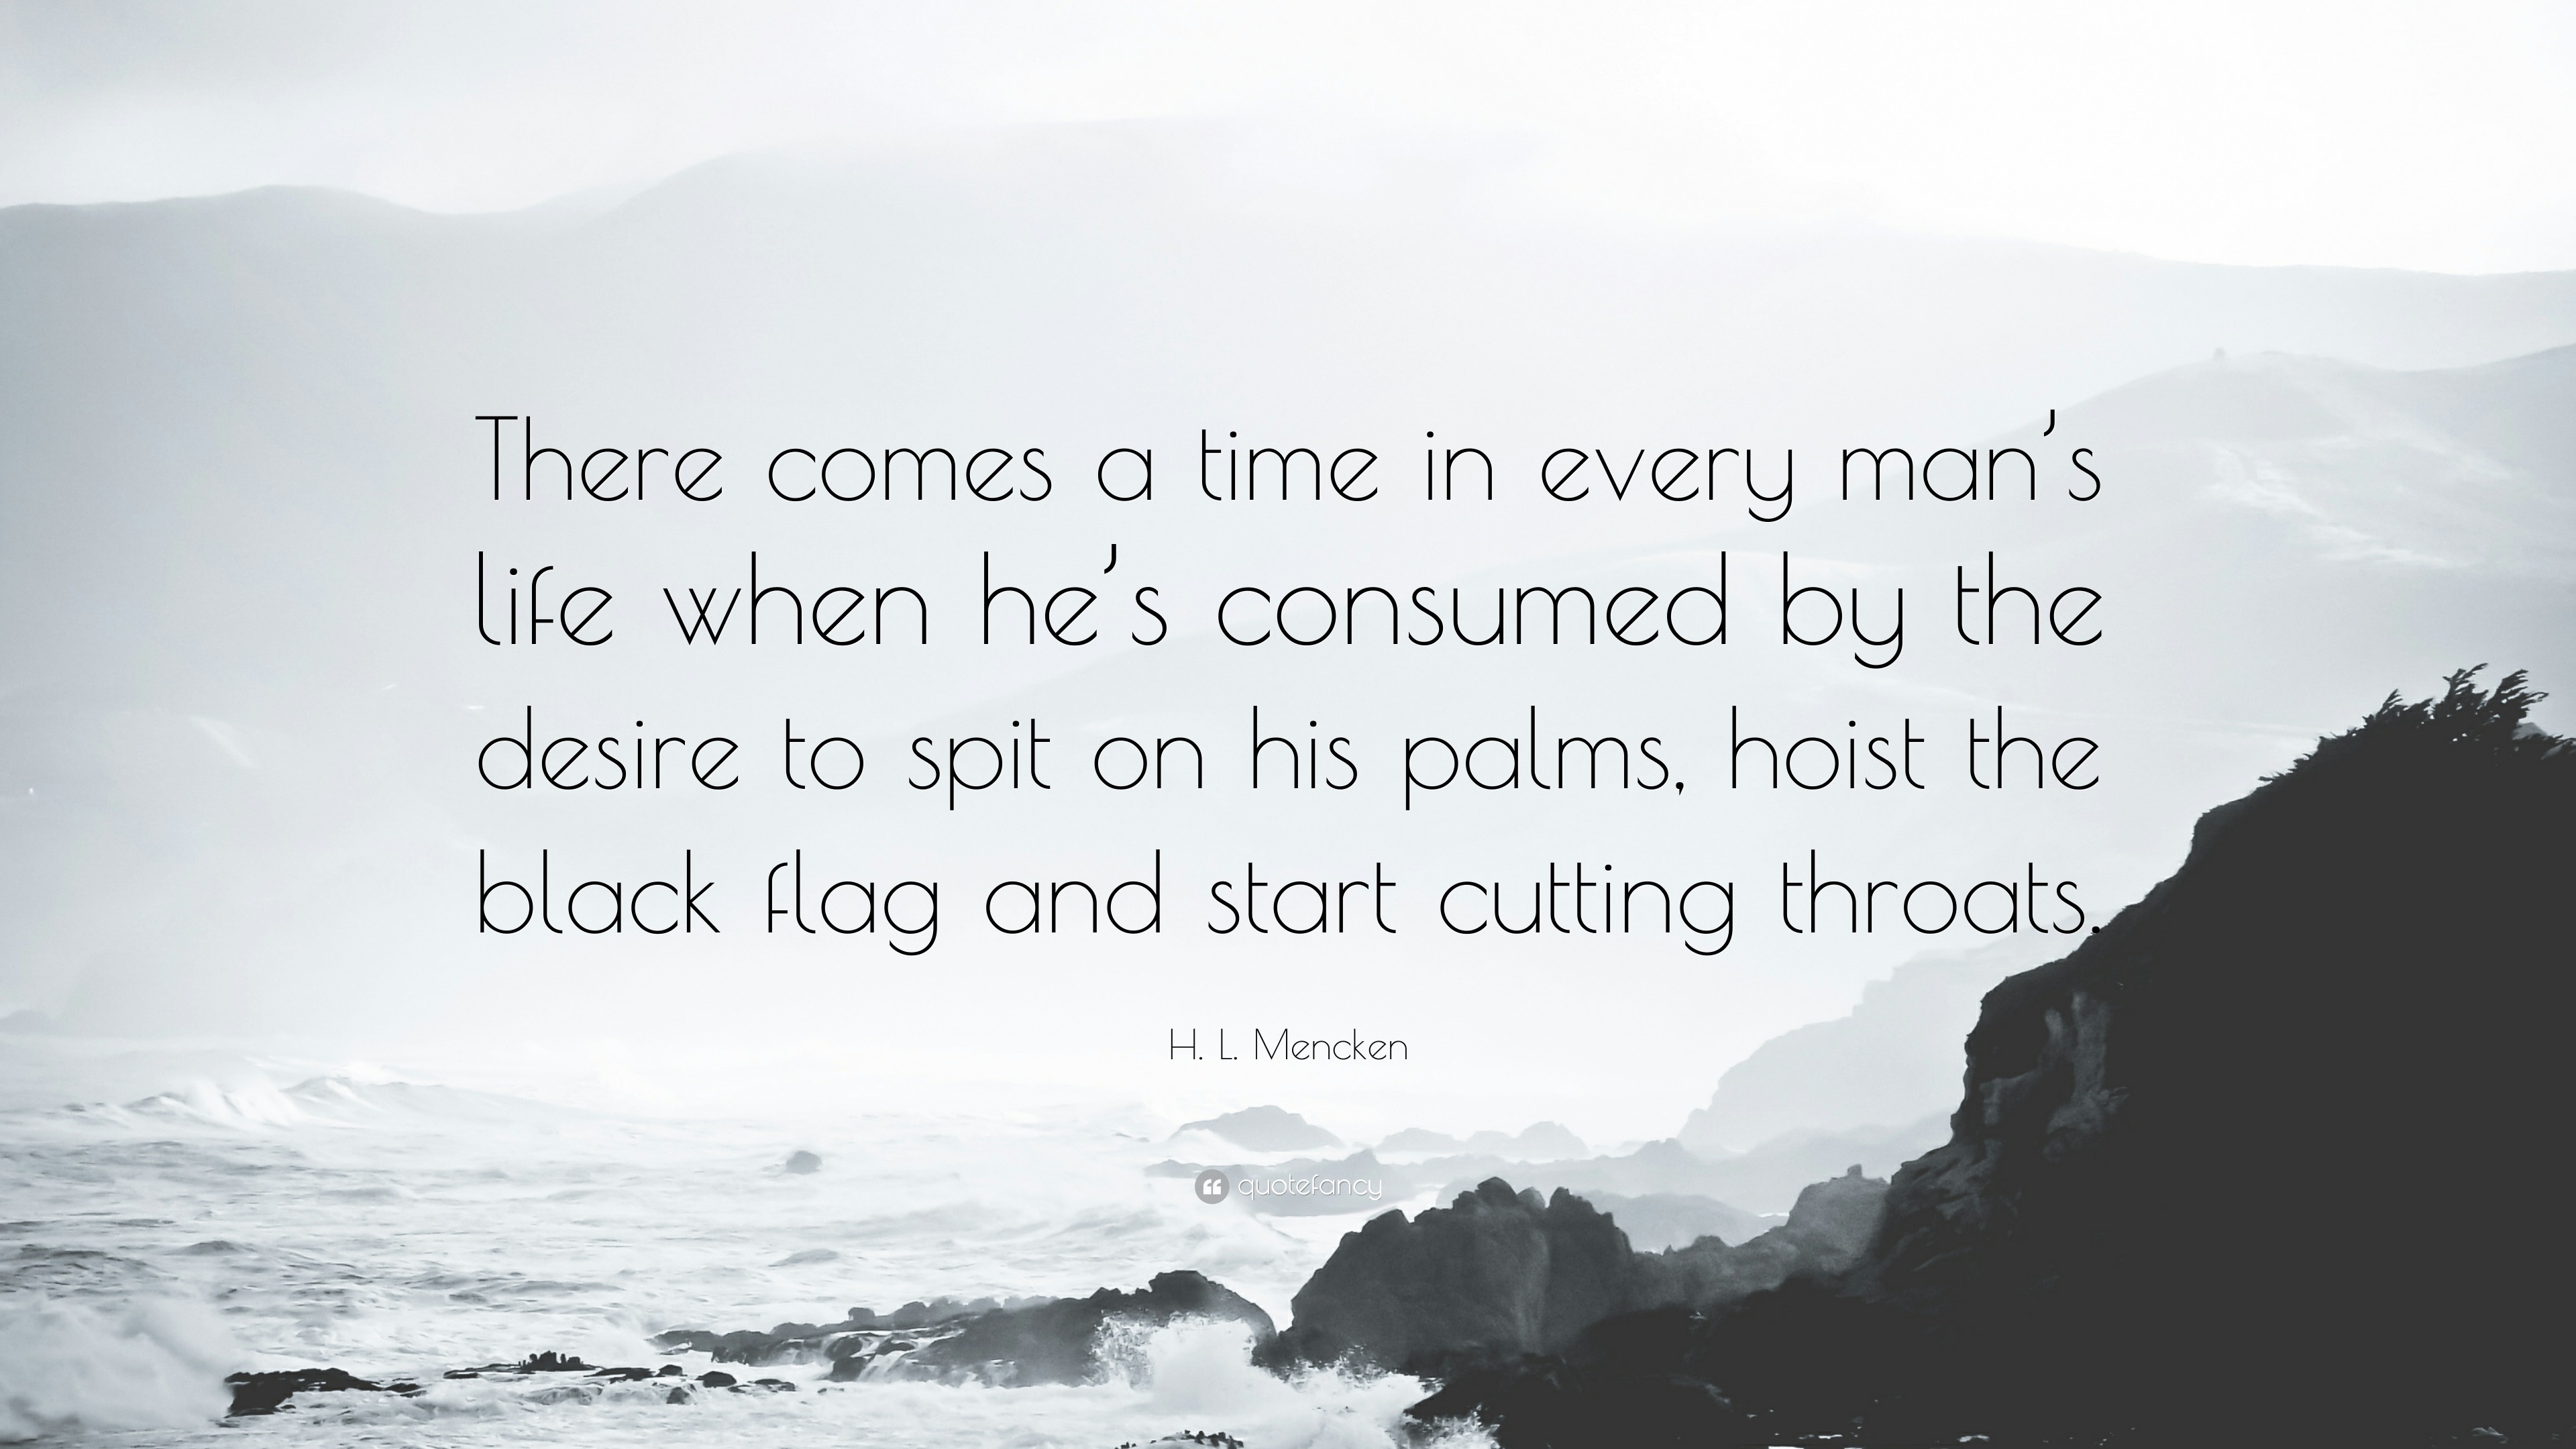 H. L. Mencken Quote: “There Comes A Time In Every Man's Life When He's Consumed By The Desire To Spit On His Palms, Hoist The Black Flag And S...”